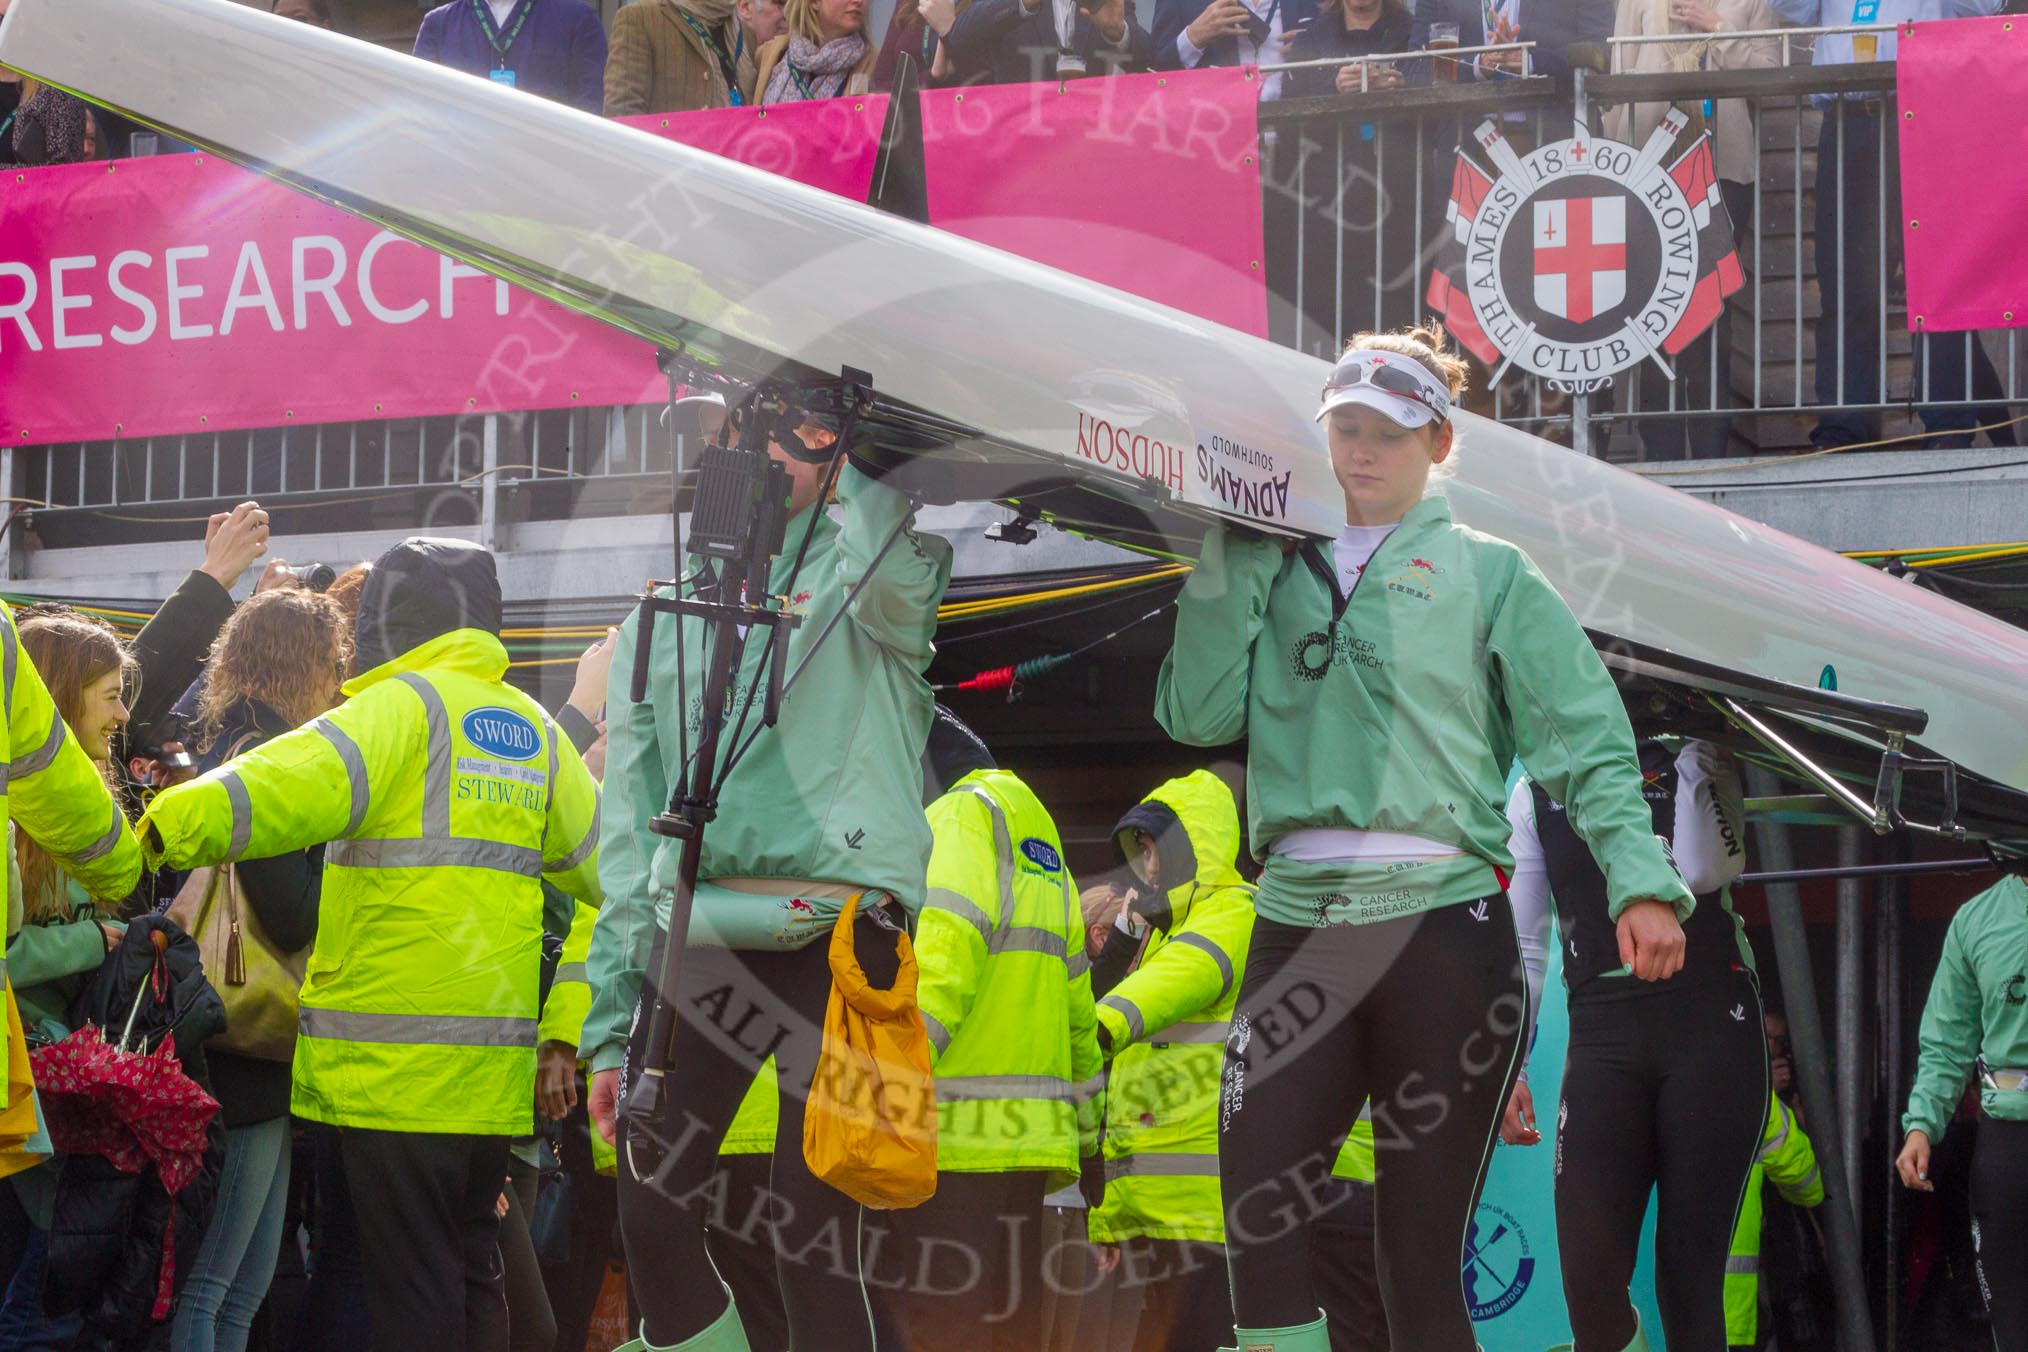 The Boat Race season 2016 -  The Cancer Research Women's Boat Race.
River Thames between Putney Bridge and Mortlake,
London SW15,

United Kingdom,
on 27 March 2016 at 13:25, image #92